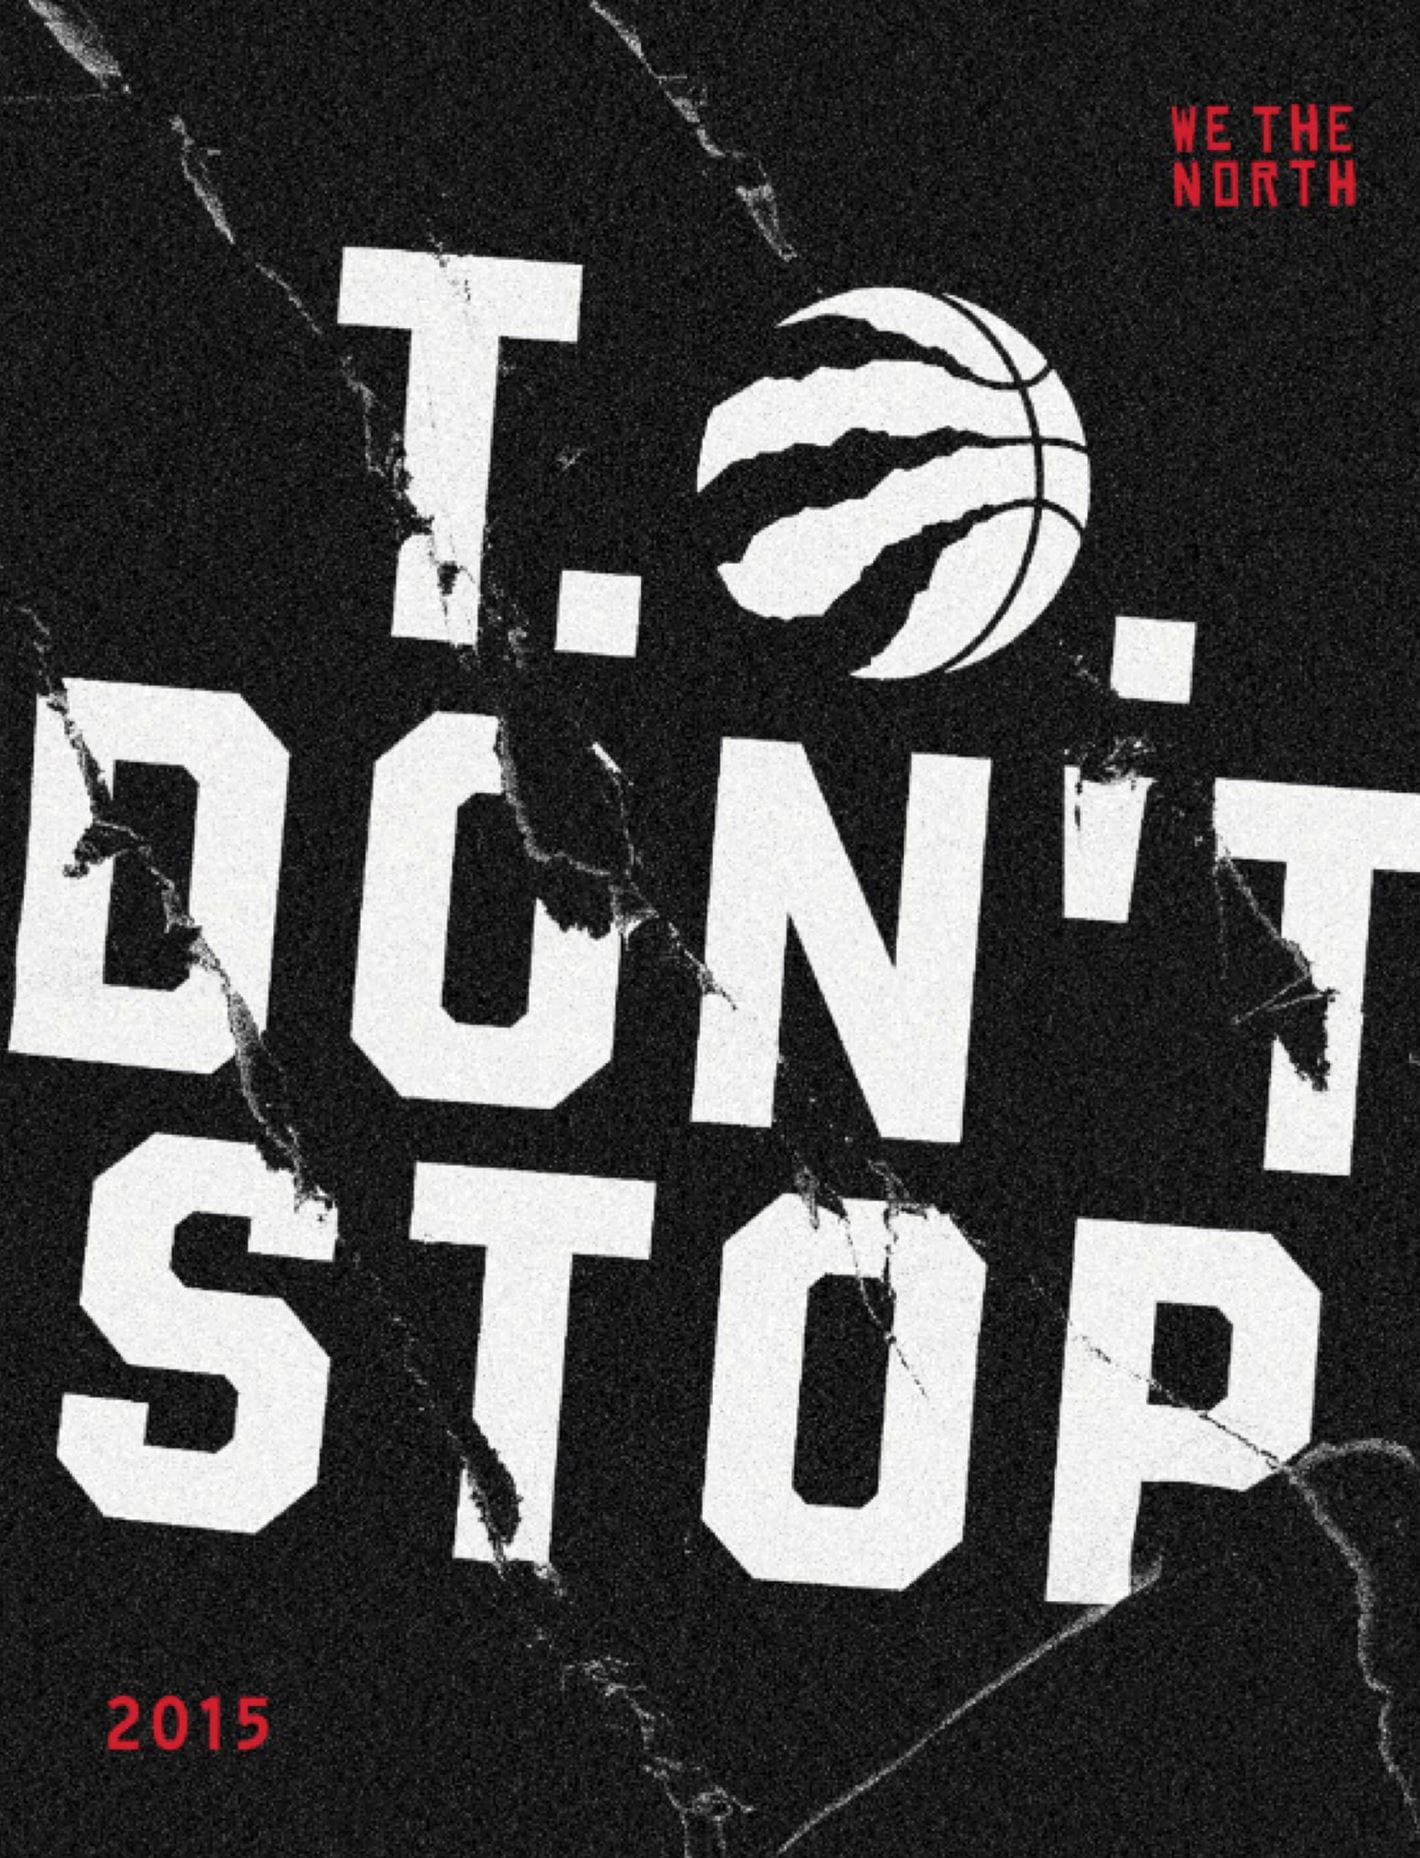 WE THE NORTH Campaign: How the Raptors Marketing Dept. Created A